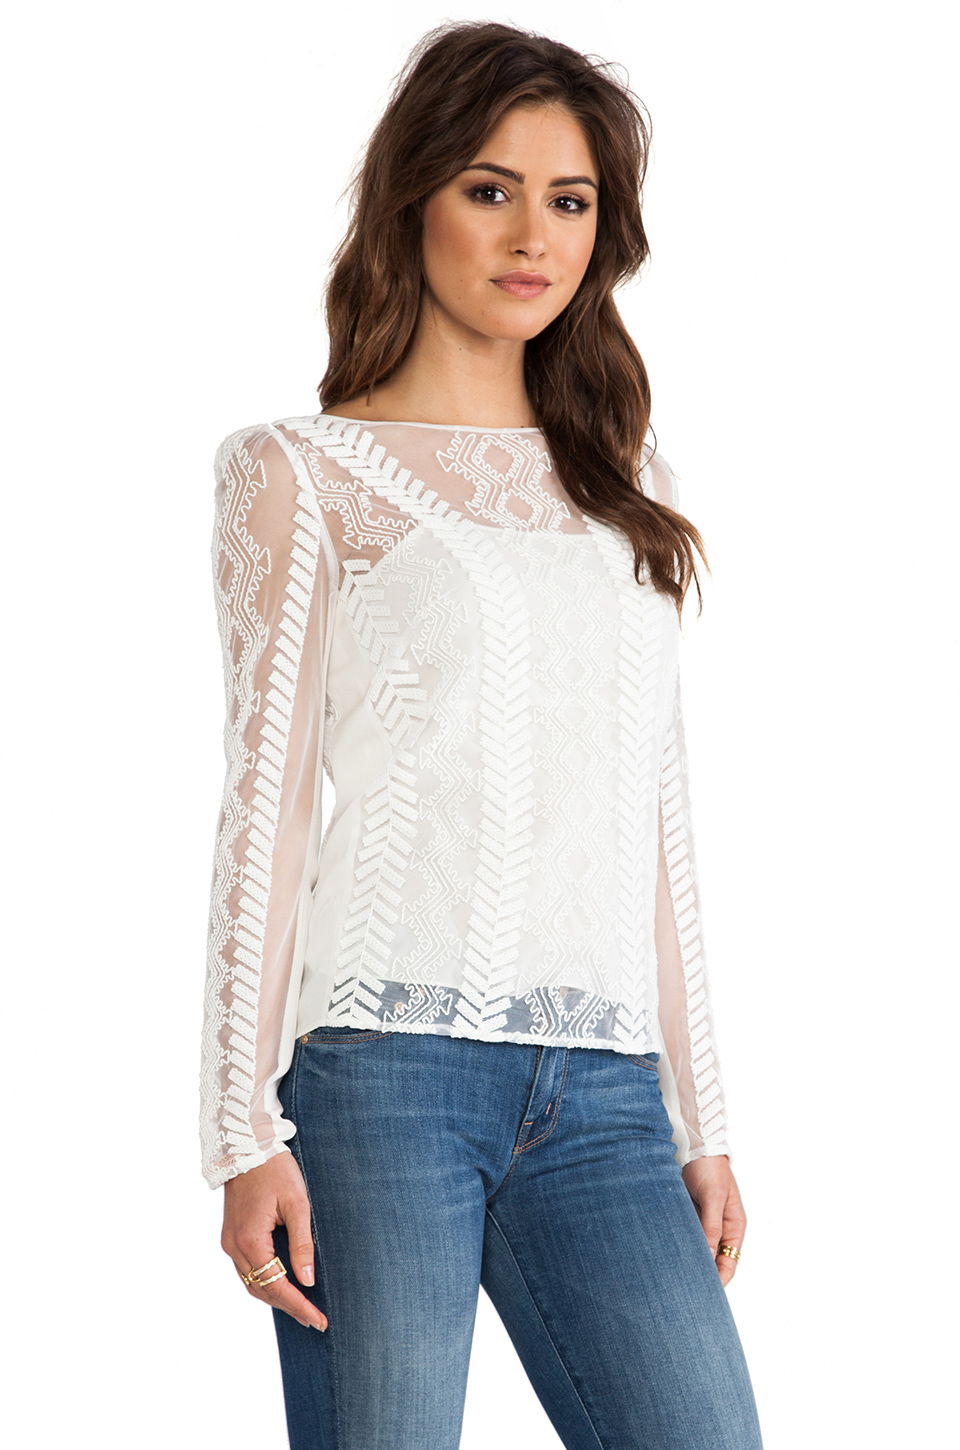 Lyst - Catherine Malandrino Long Sleeve Top in Blanc in Natural